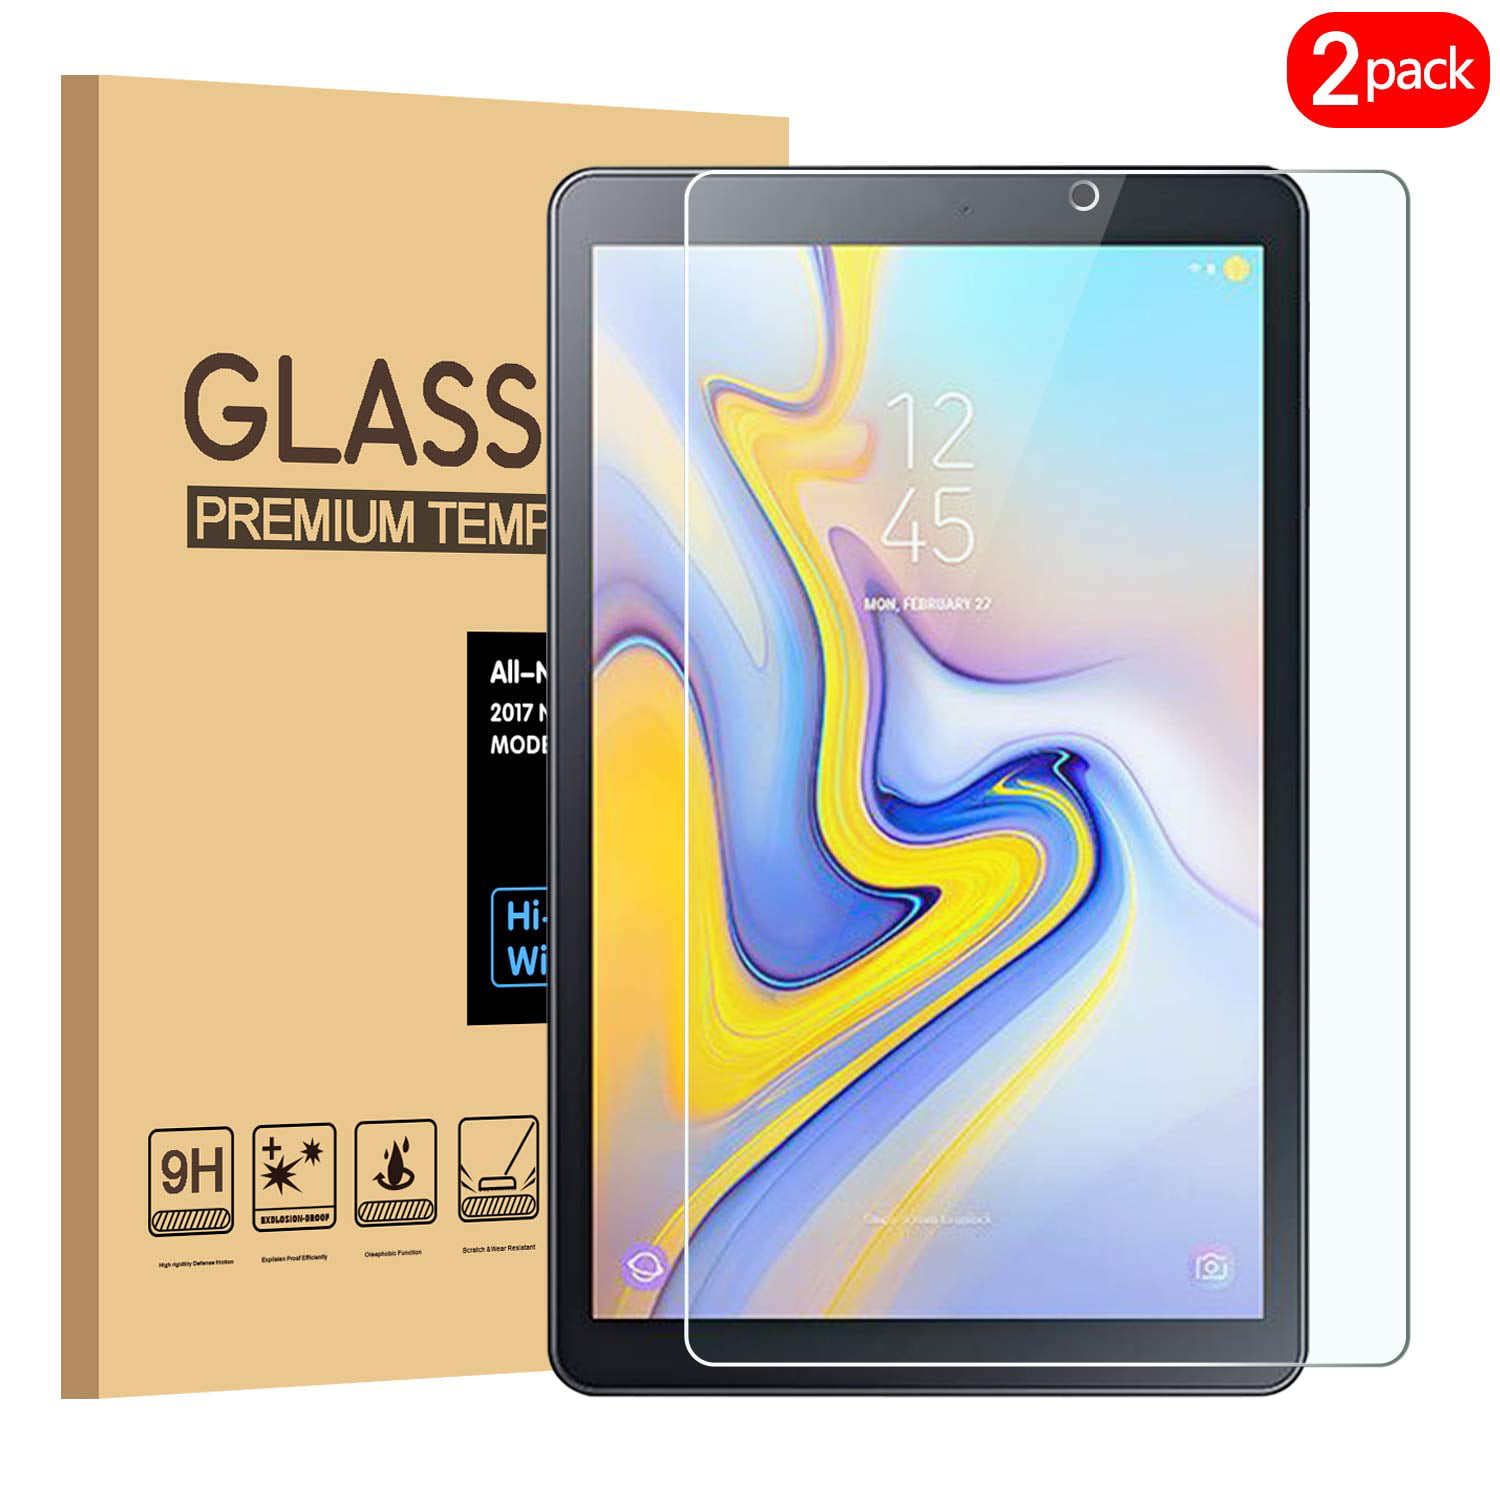 2-PACK Tempered Glass Screen Protector For SAMSUNG GALAXY TAB A 7.0 SM T280 